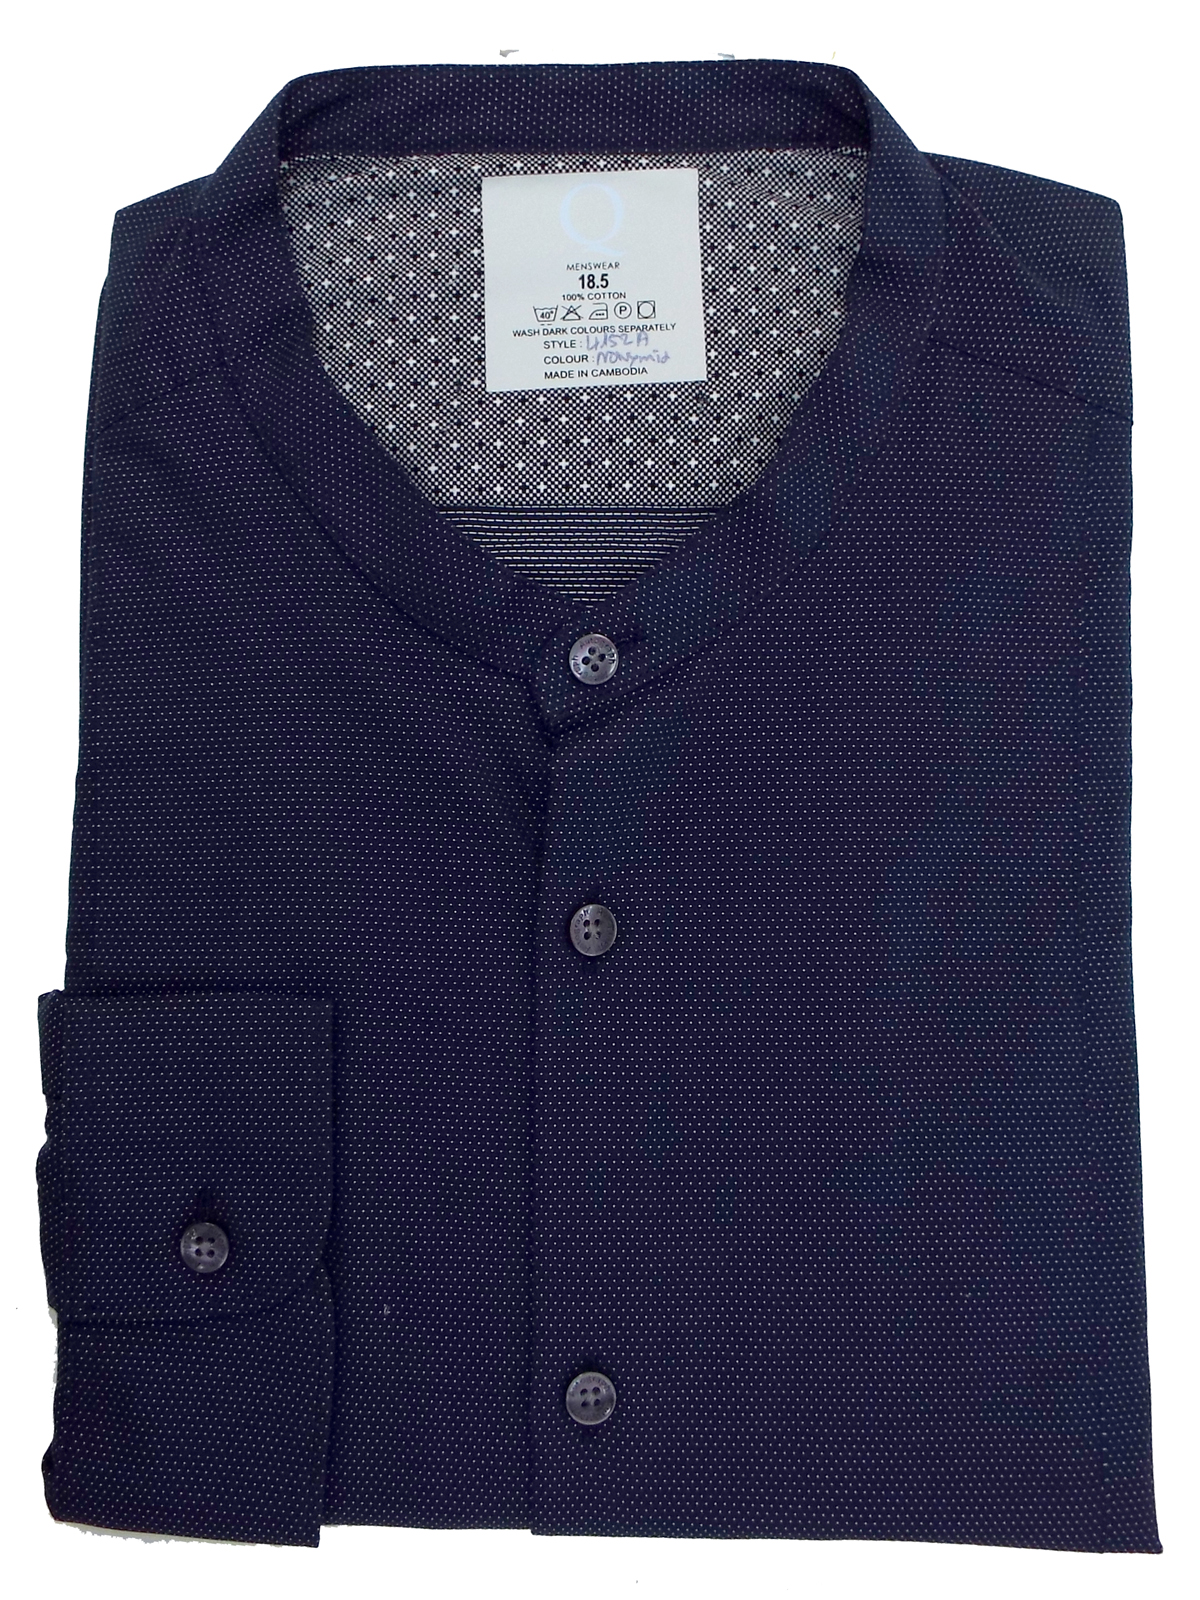 Marks and Spencer - - M&5 NAVY Dobby Spotted Collarless Shirt - Collar ...